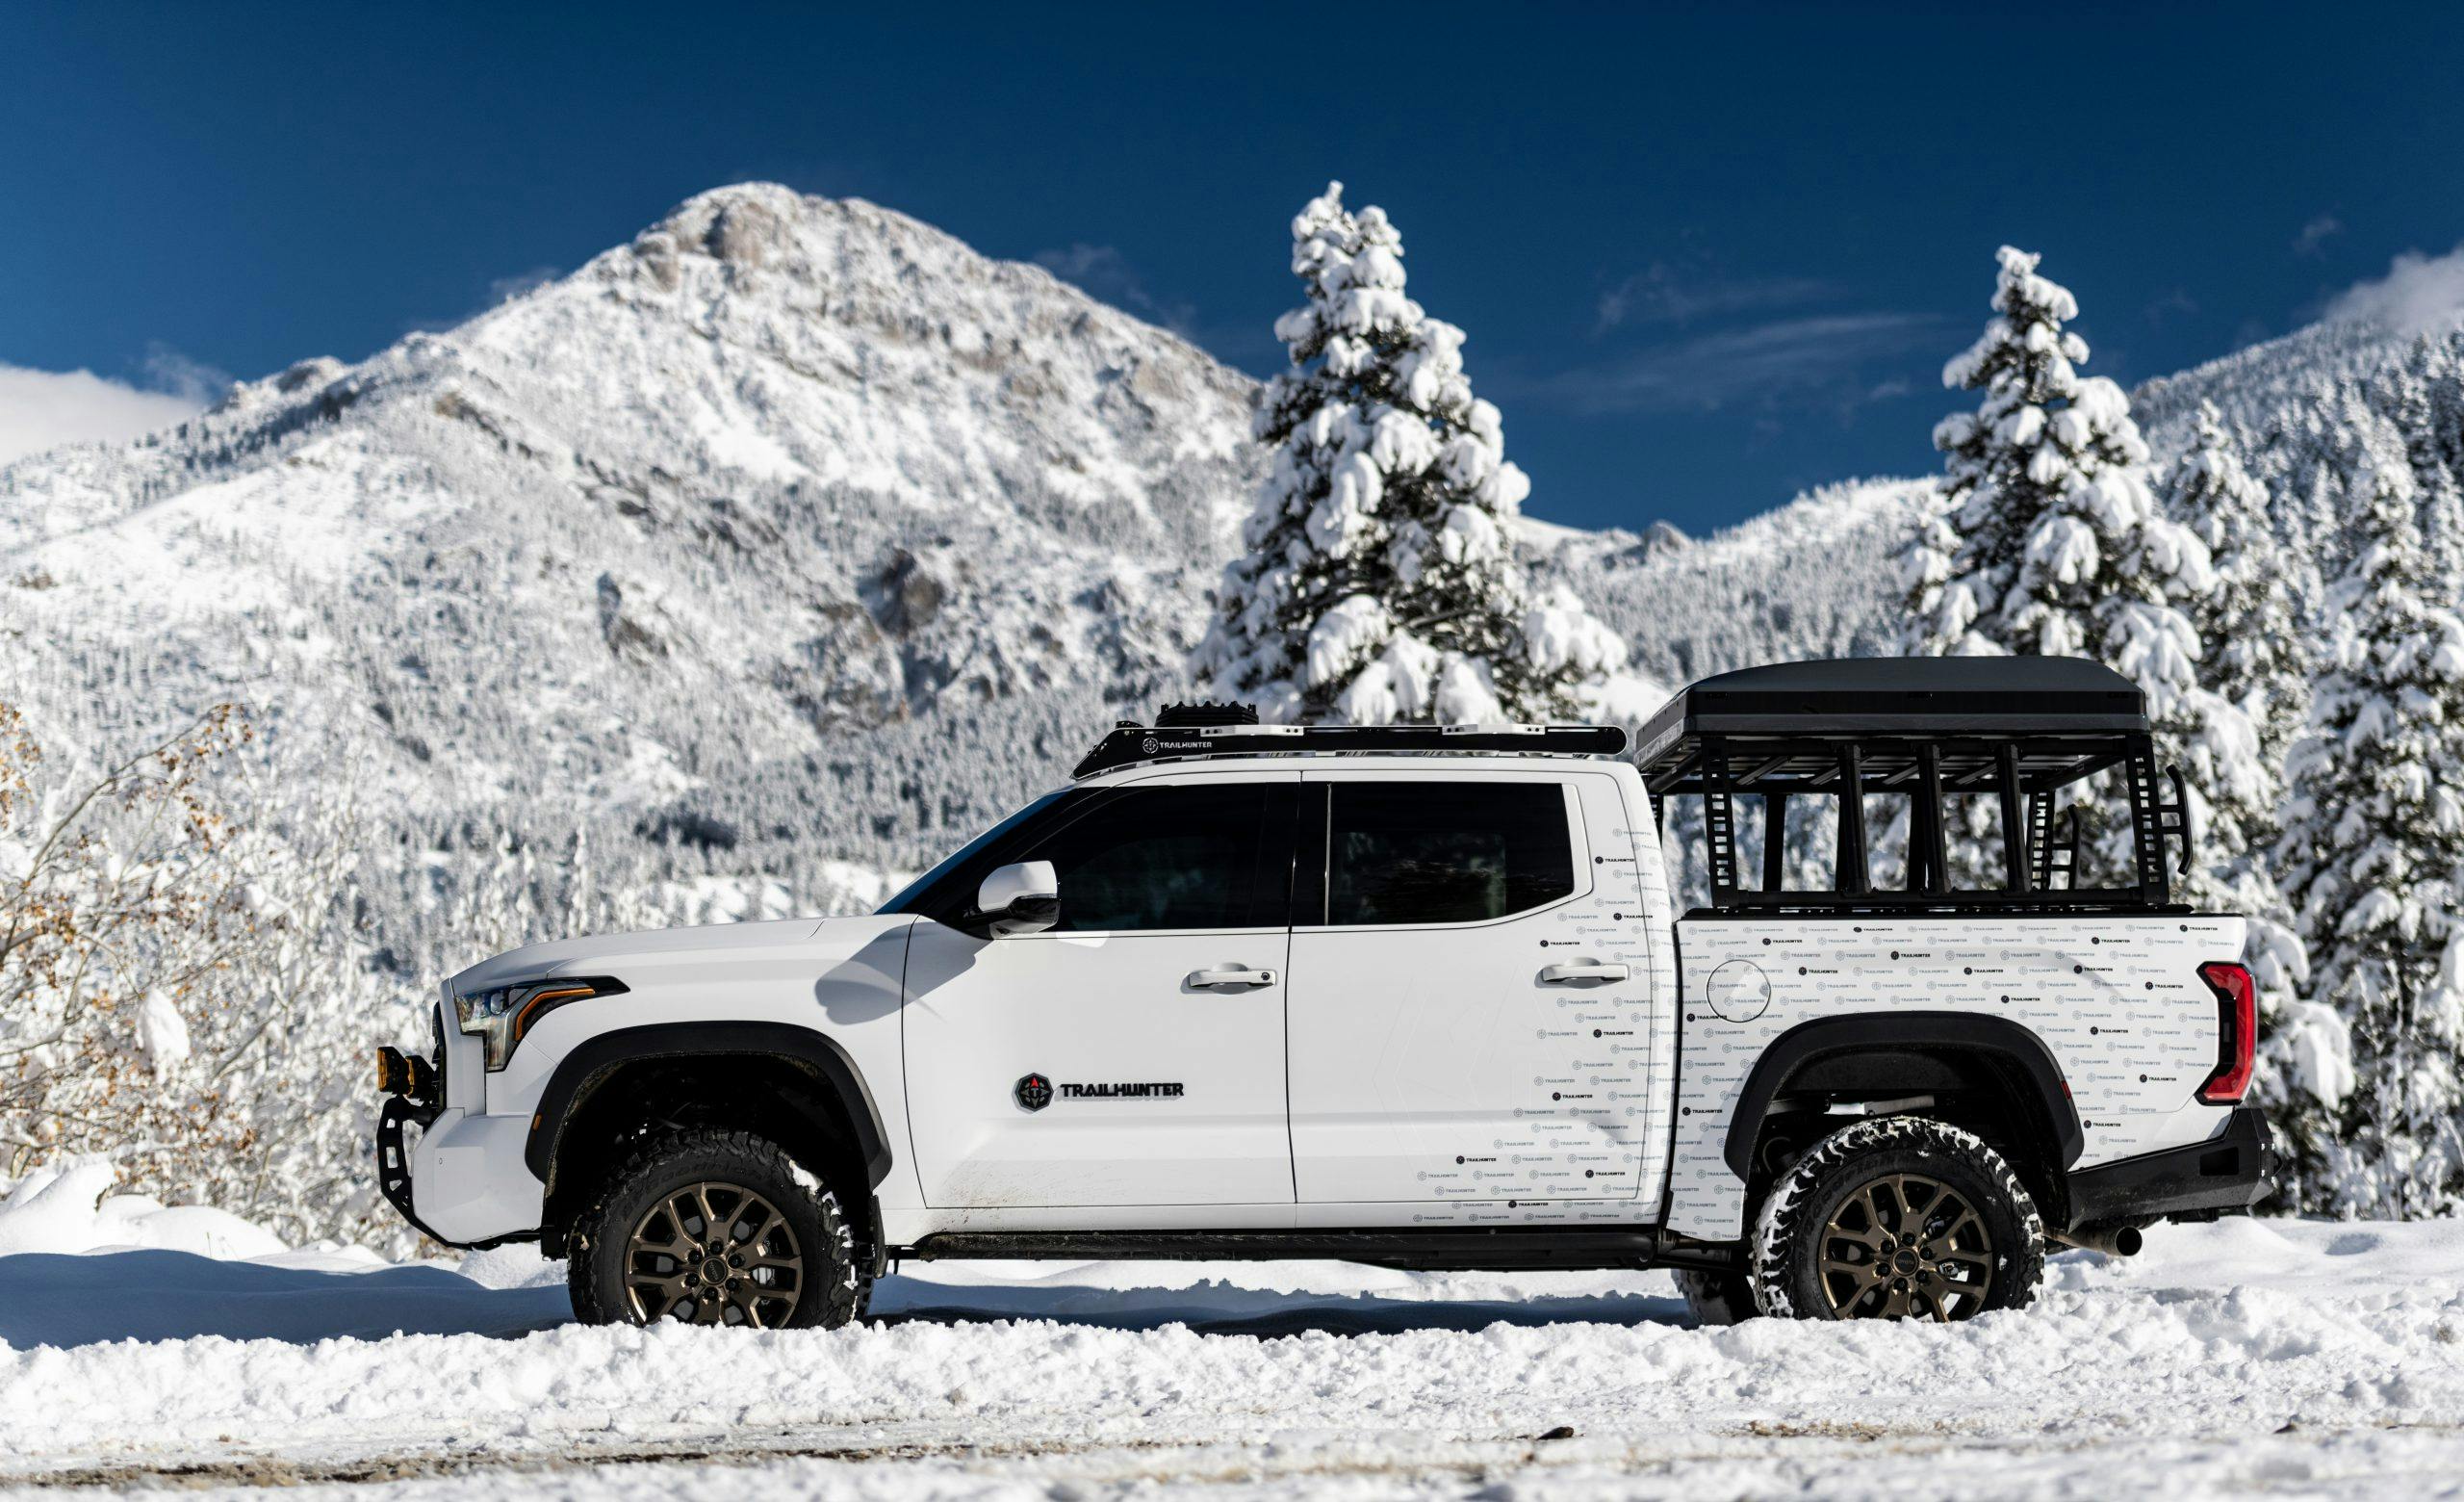 Toyota Trailhunter Concept exterior side profile in the snow